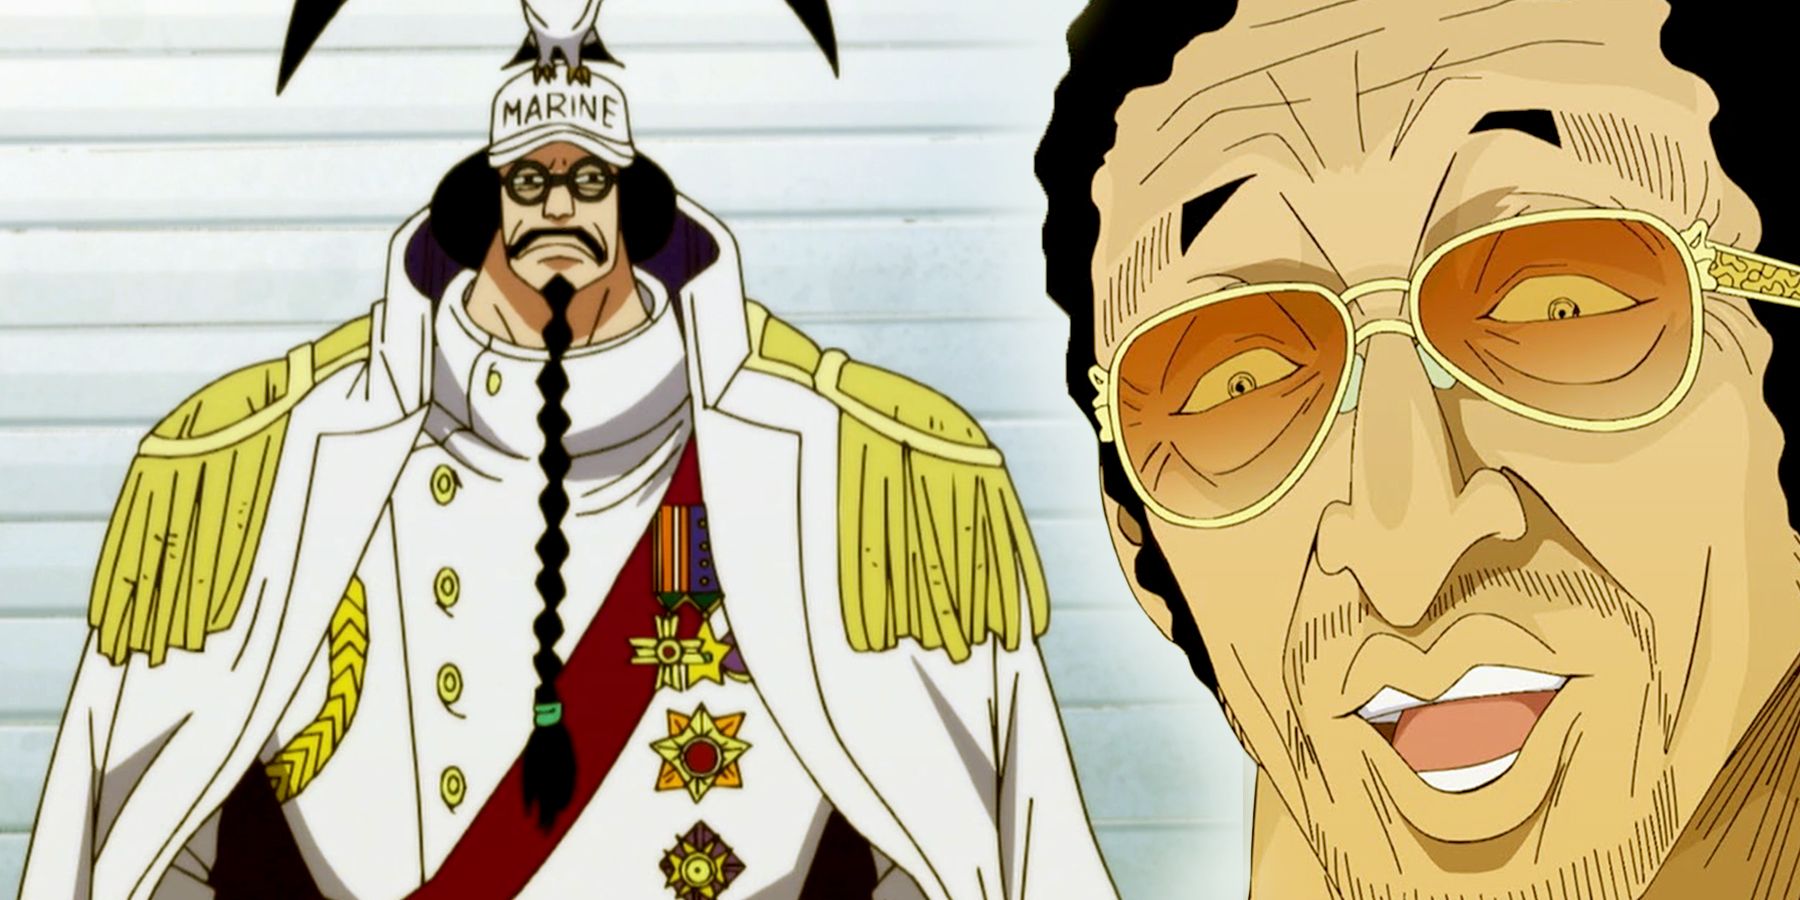 On the right, Kizaru raises his brows while talking. On the left, Sengoku stands solemnly.